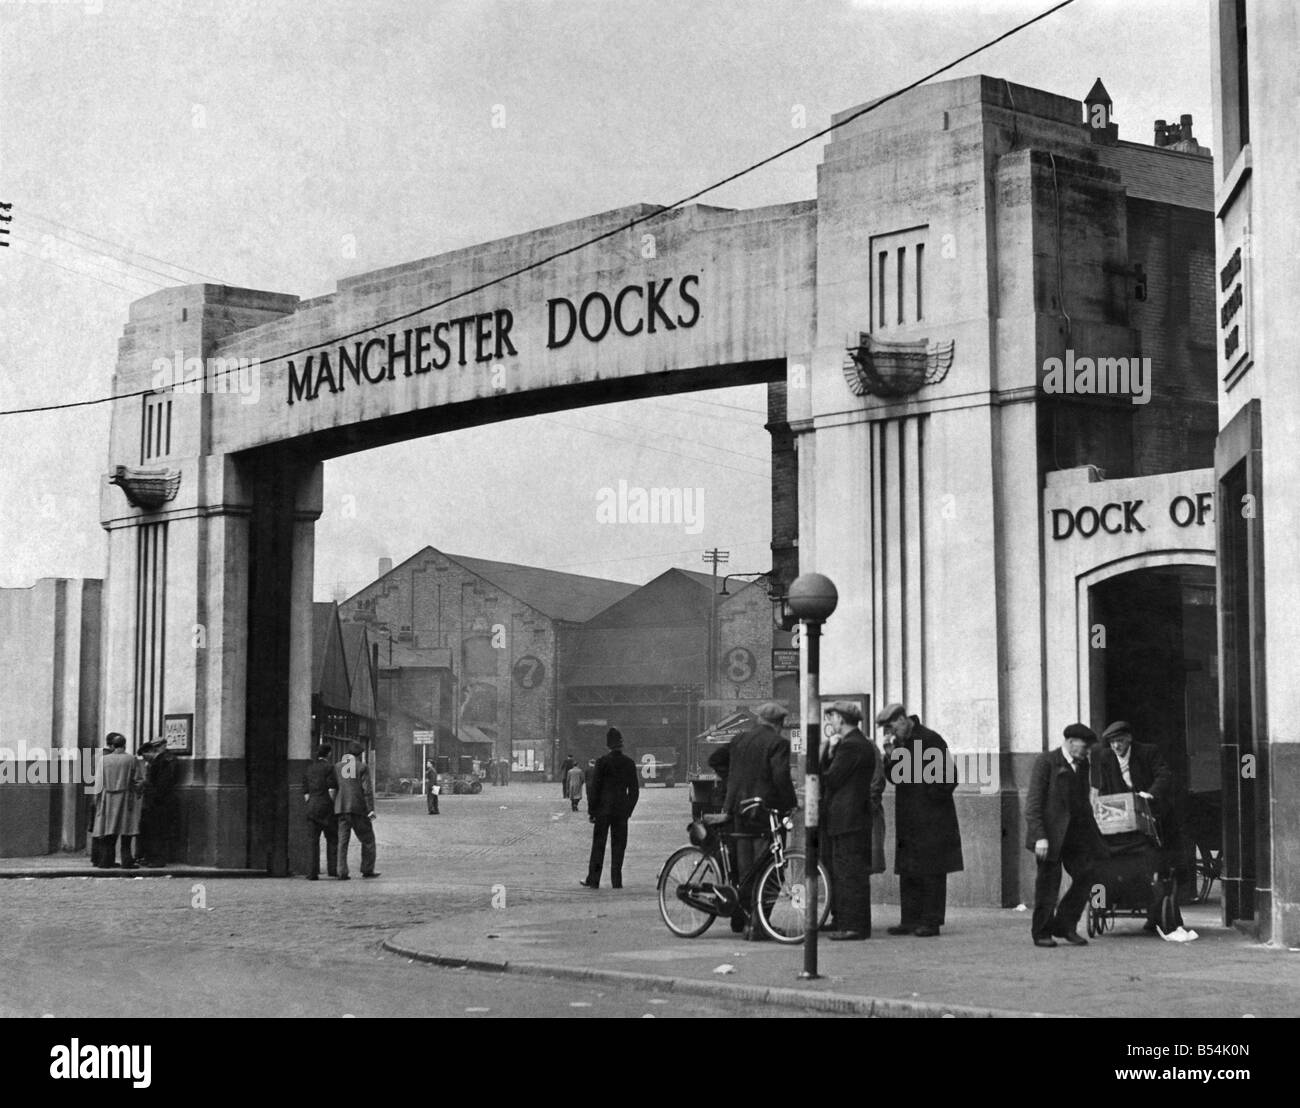 Only a few groups of men stand chatting at the gate of a deserted Manchester dock &#13;&#10;May 1951 &#13;&#10;P011969 Stock Photo